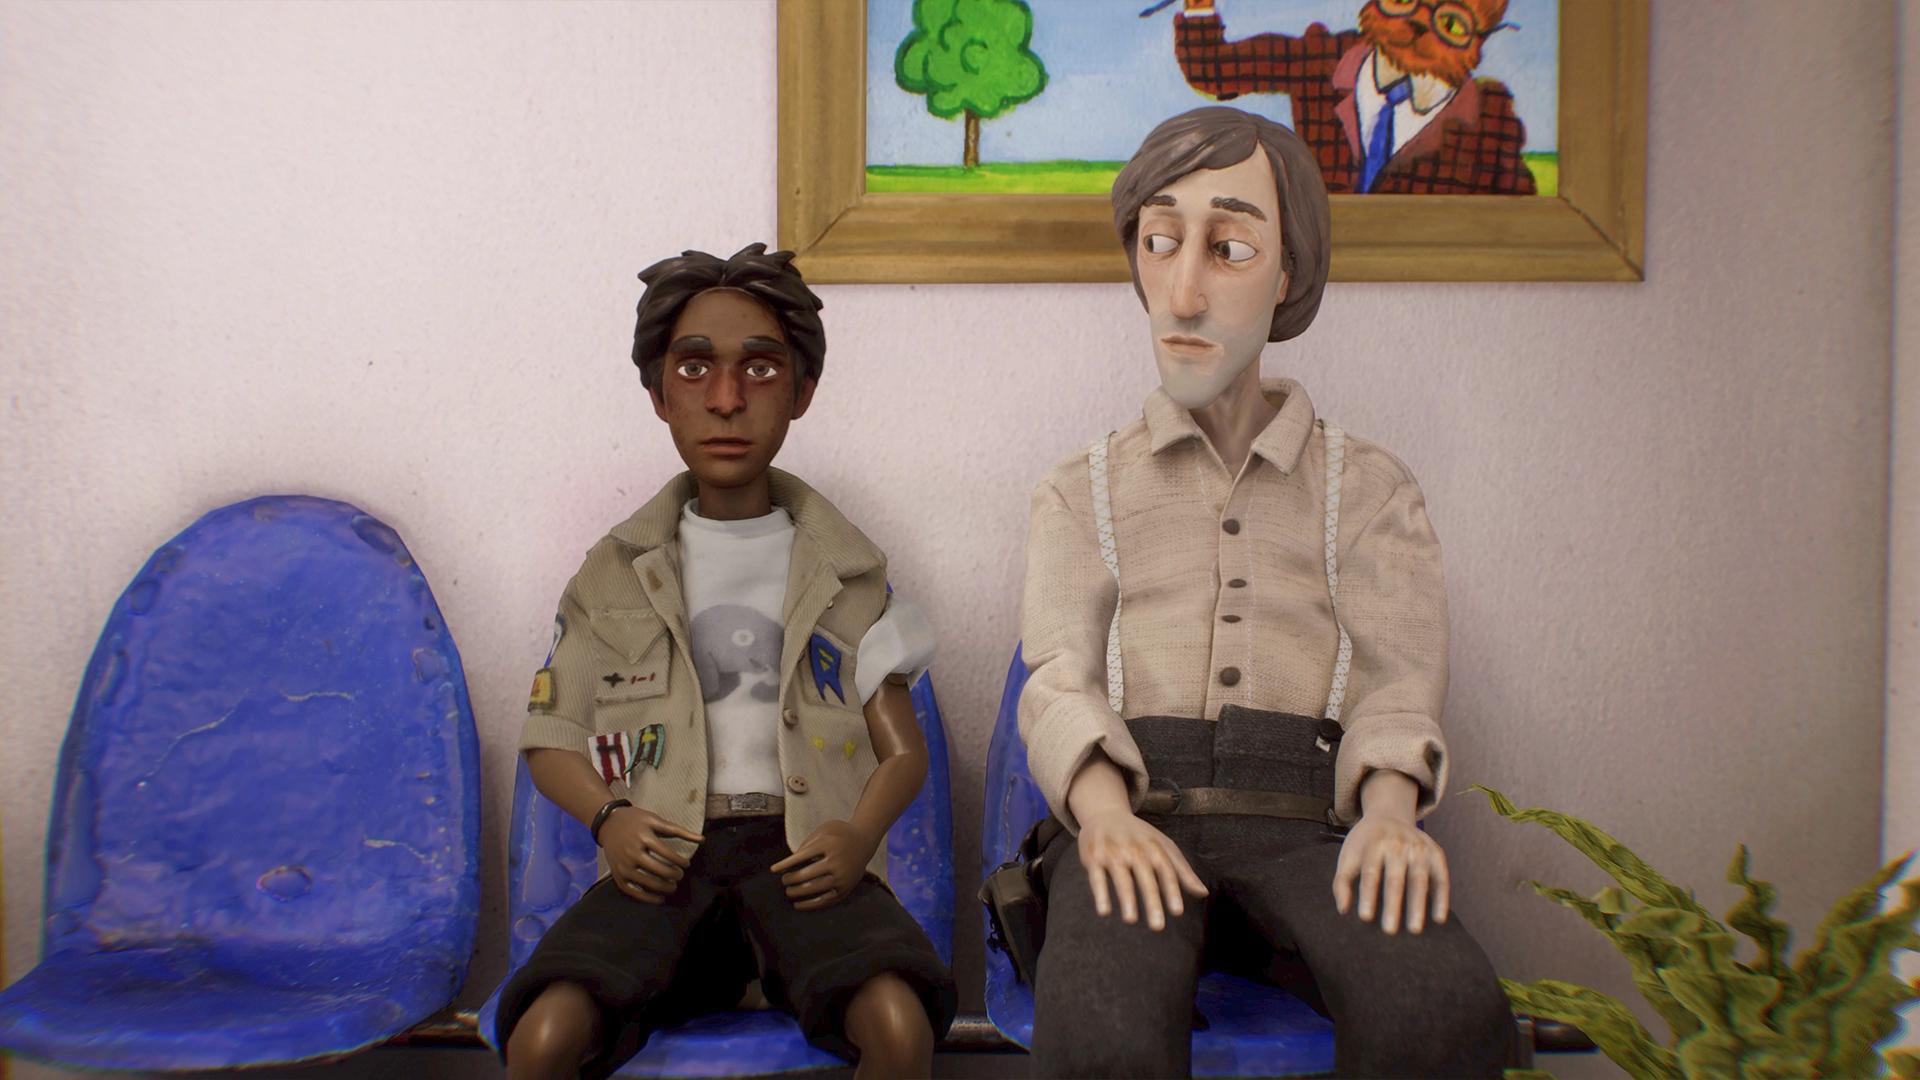  Hot damn, this game looks exactly like a stop motion Wes Anderson movie 